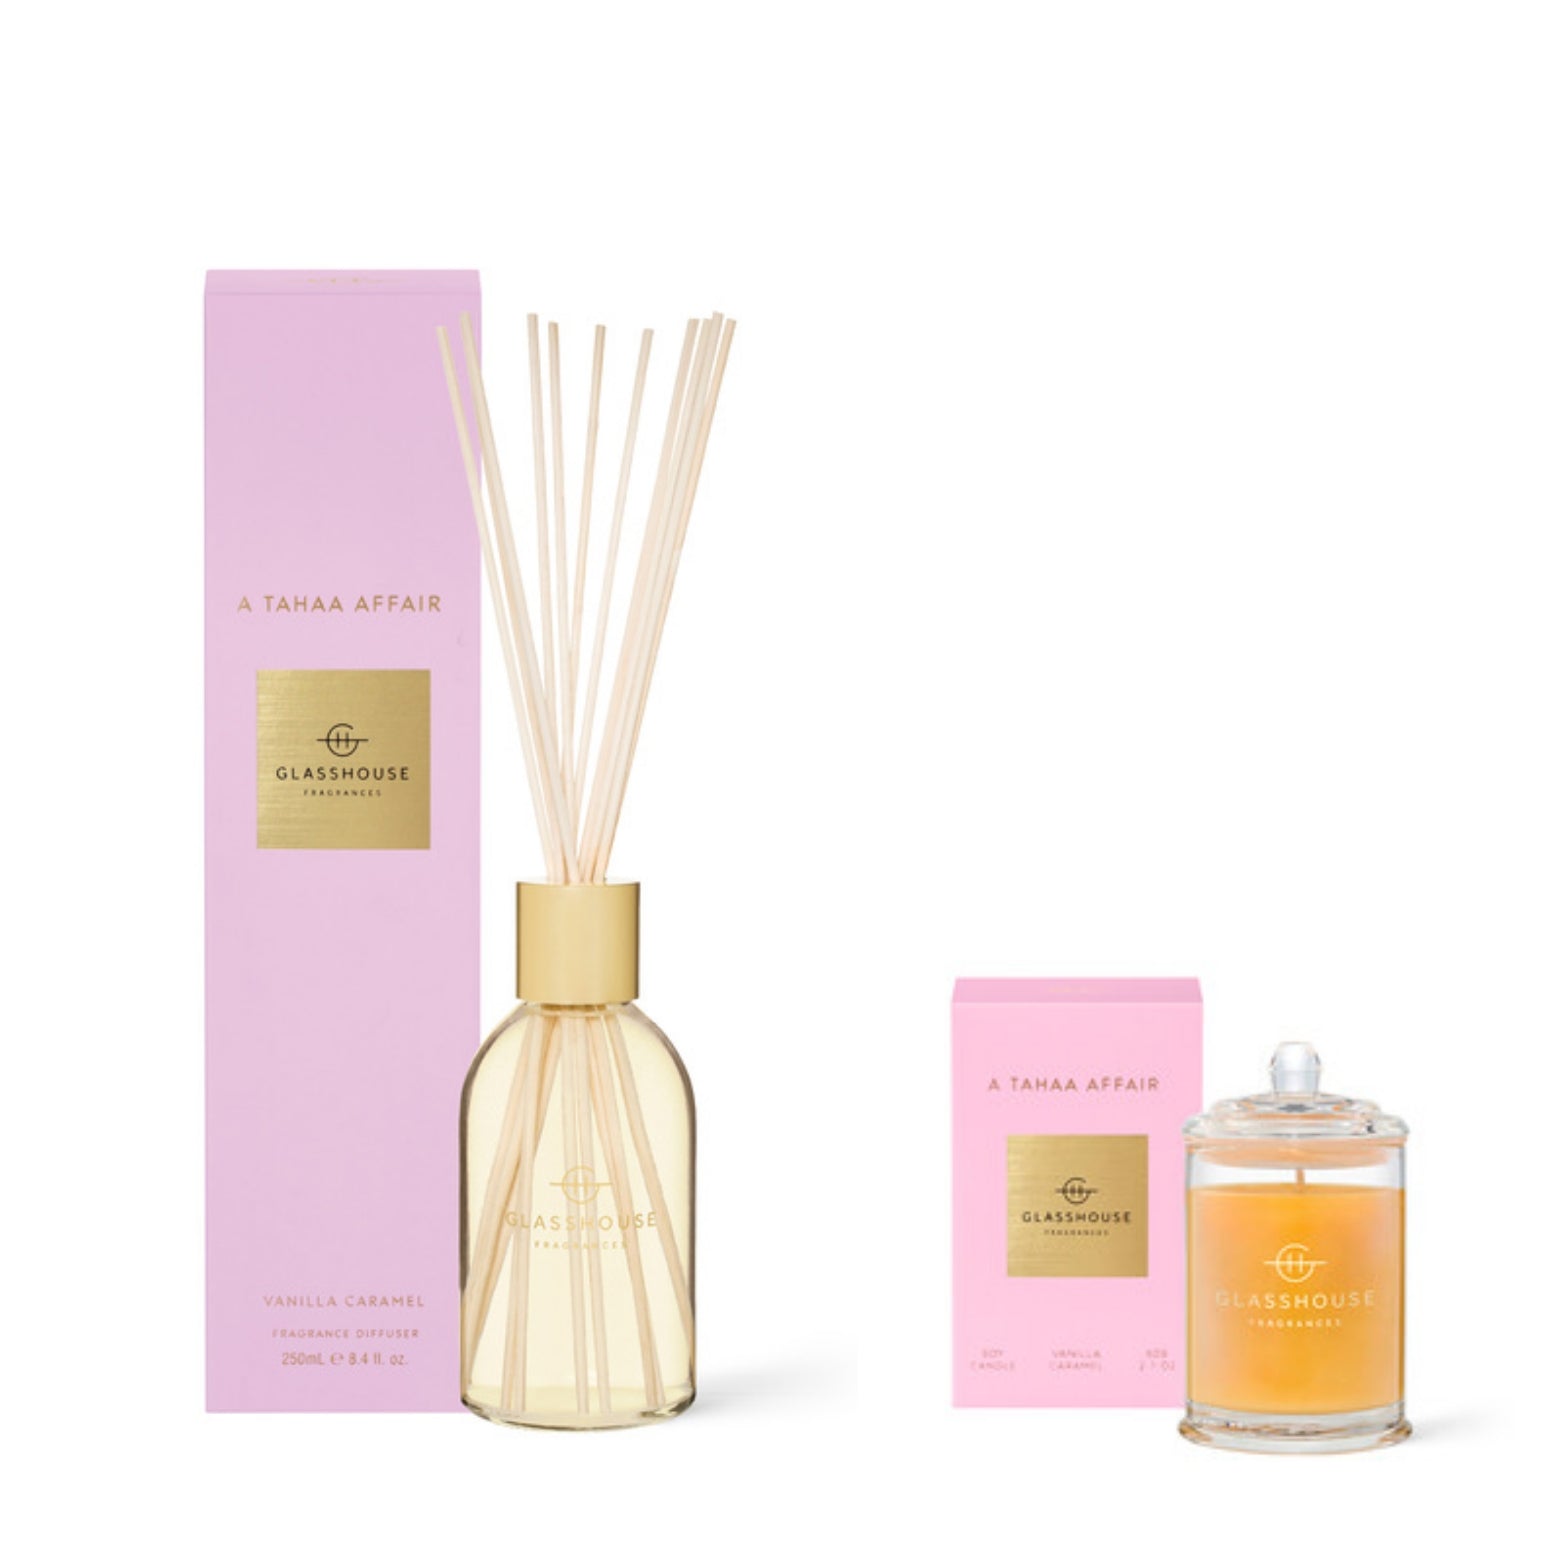 Glasshouse Diffuser + Candle (60g) Duo Gift Pack A Tahaa Affair - Exquisite Laser Clinic